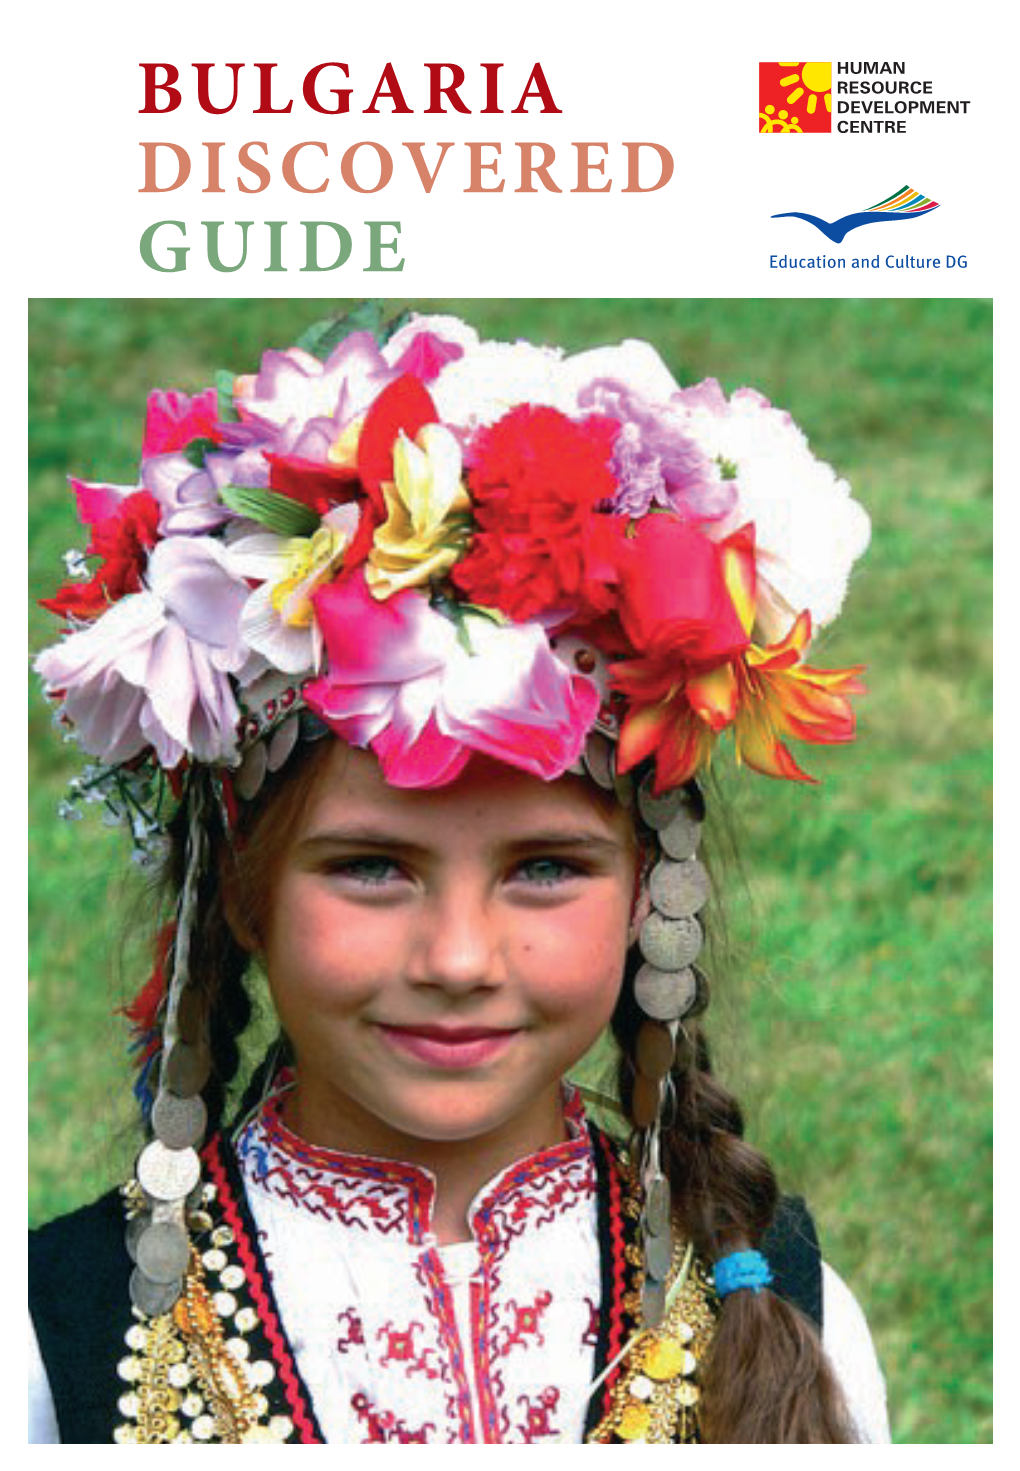 Bulgaria Discovered Guide